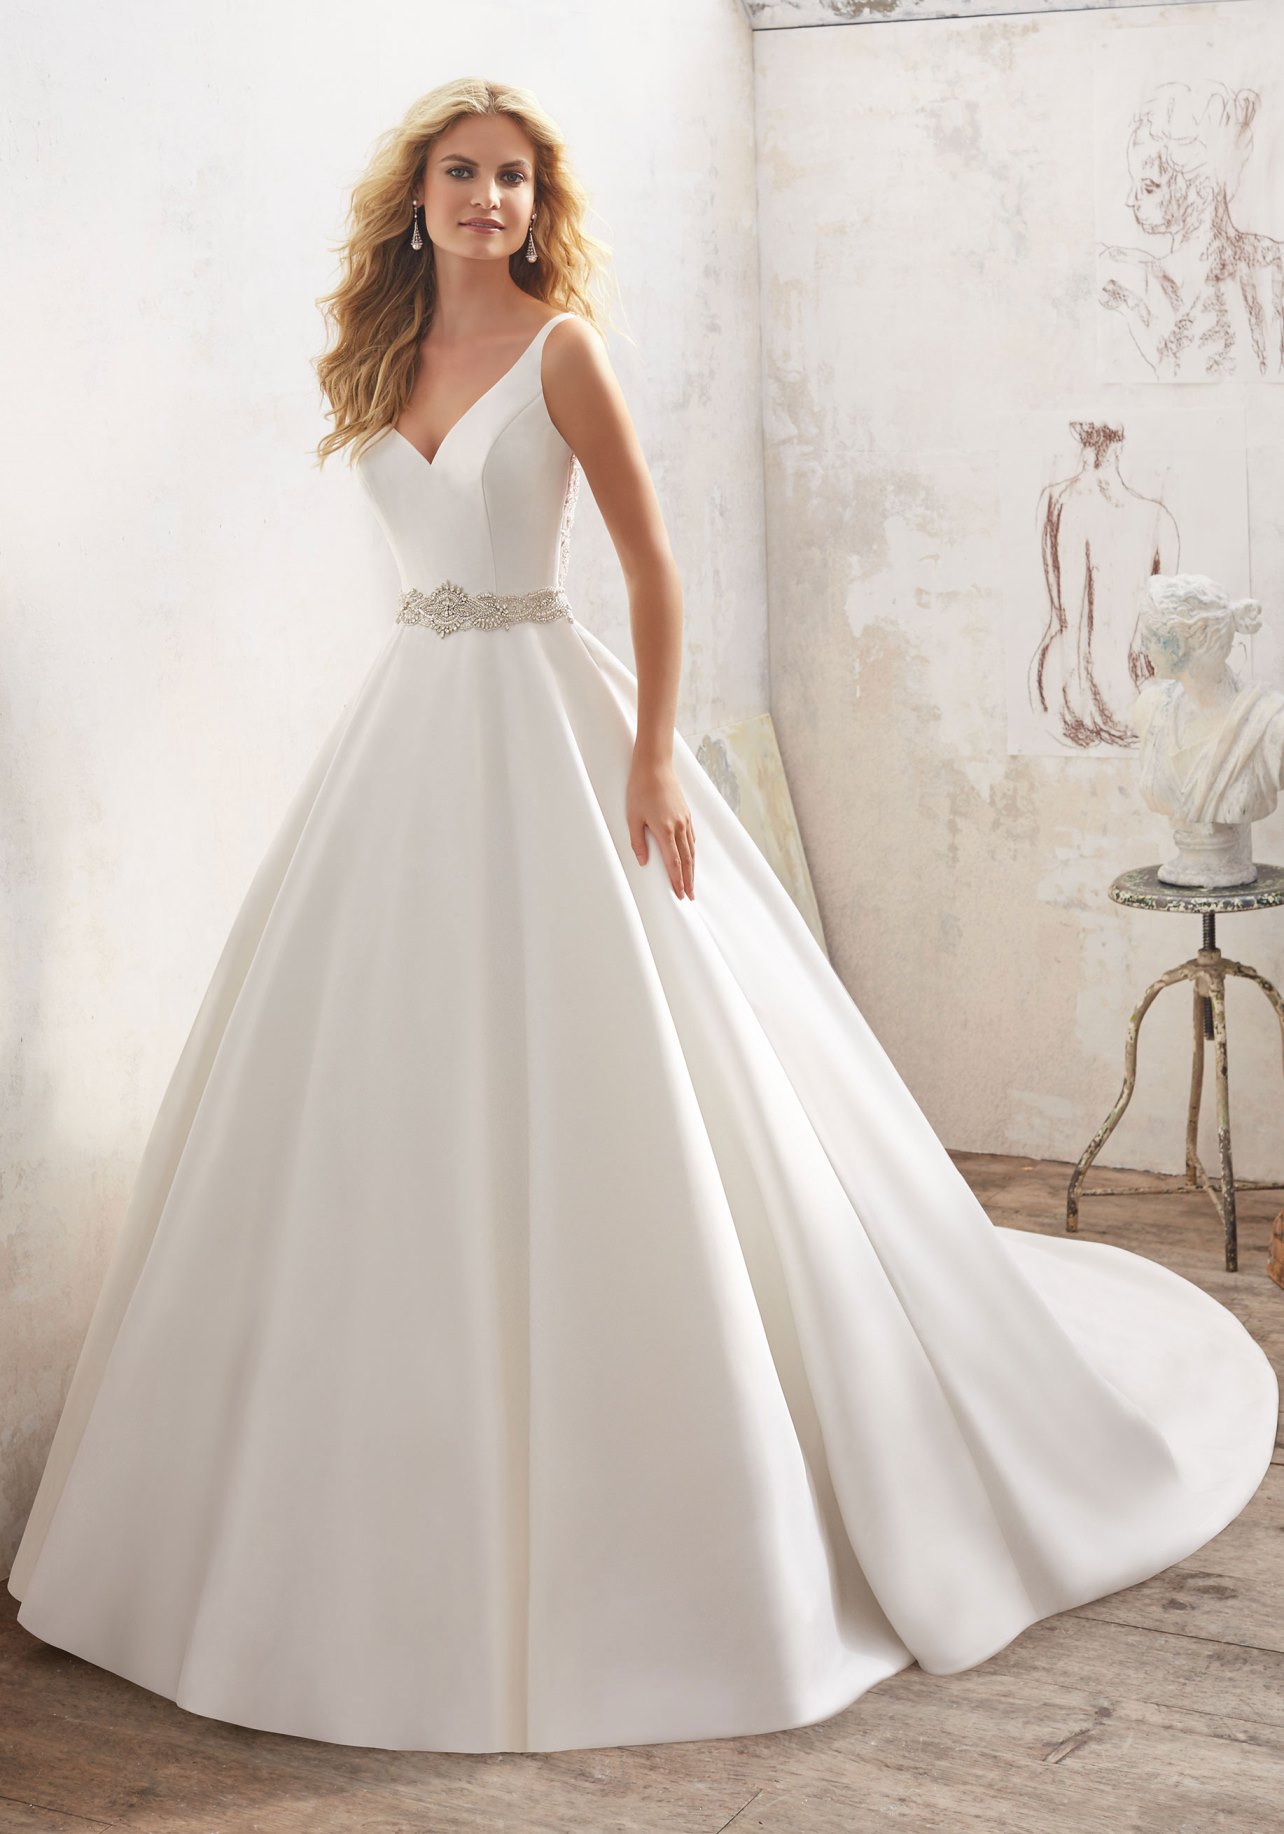 New Arrival from Morilee Bridal Gown